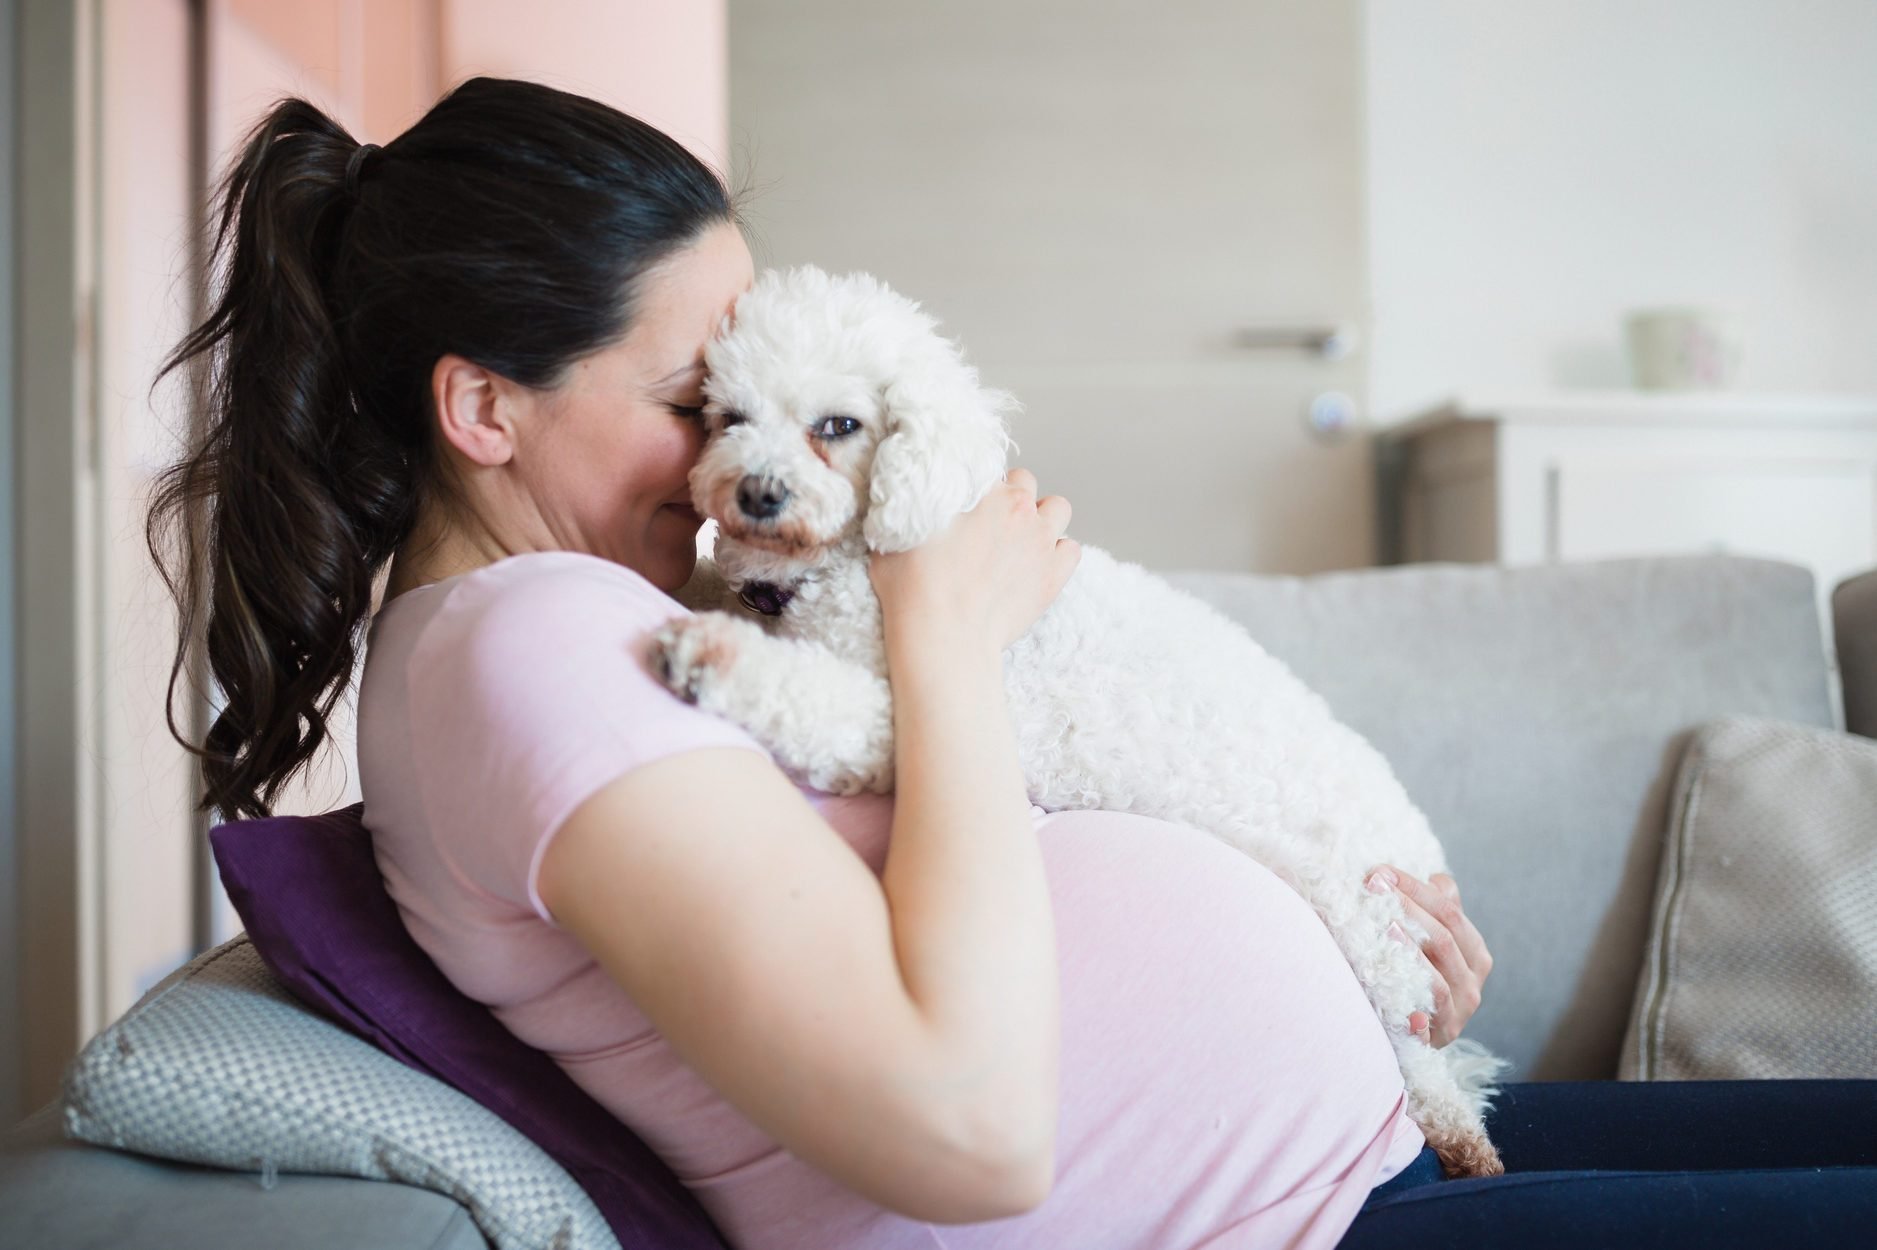 Pregnant woman having fun with her dog